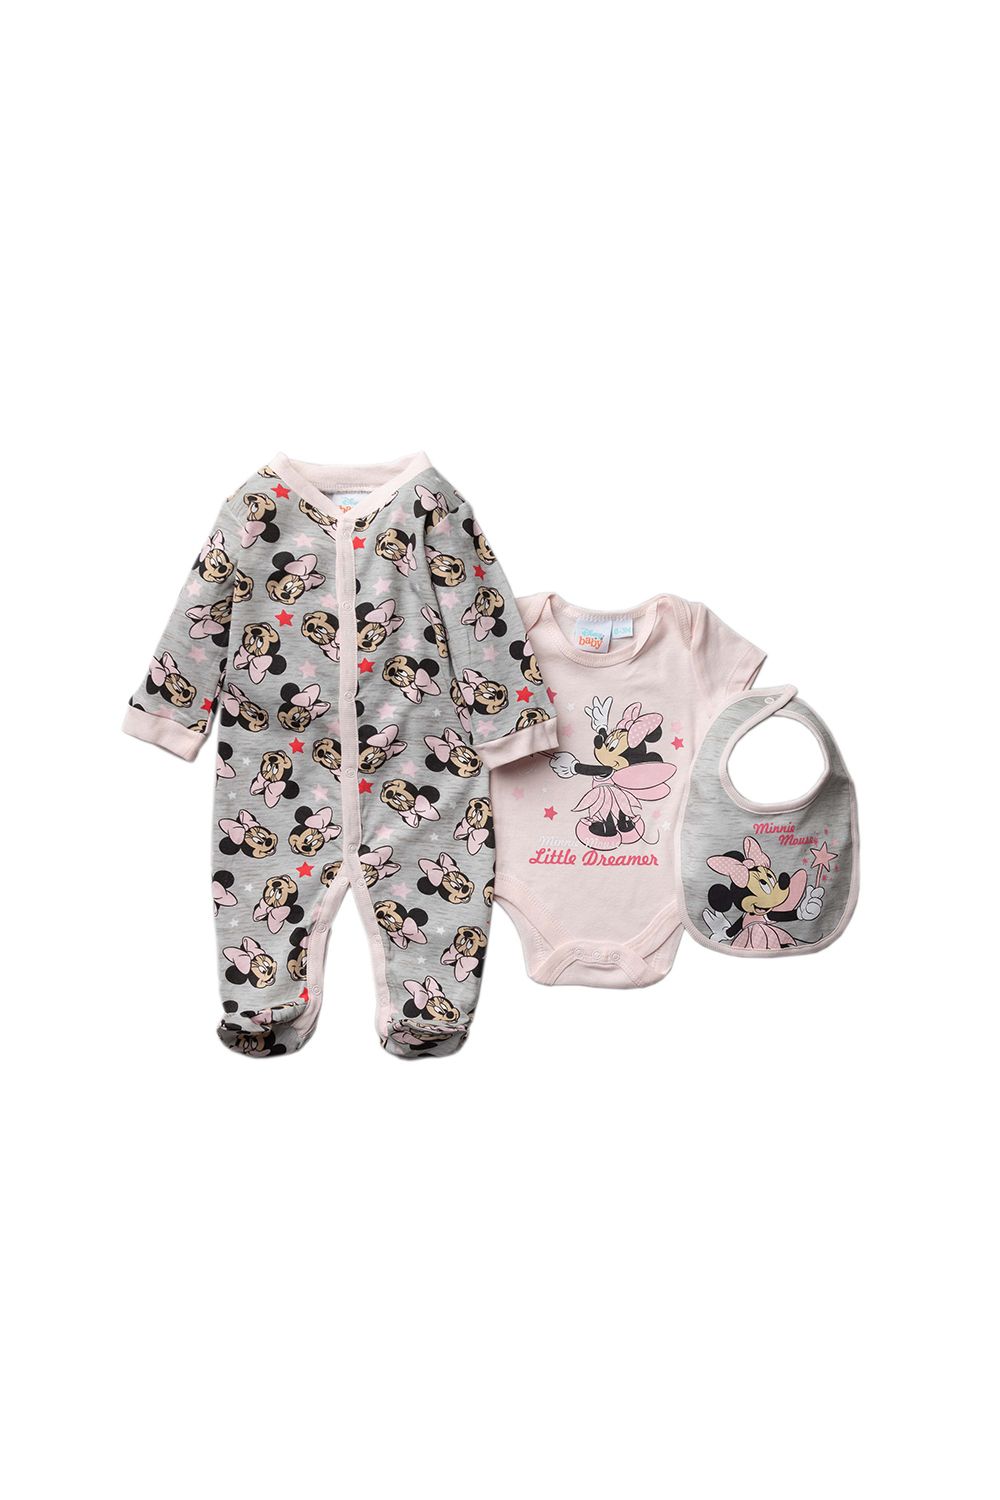 This adorable Disney Baby, Fairy Minnie Mouse three-piece set features a neutral grey and baby pink colour scheme, with a Fairy Minnie Mouse print. The set includes a button-up, footed sleepsuit with Minnie Mouse cartoon print and baby pink lining, a bodysuit with the lettering ‘little dreamer’, and a matching bib. Each item in the set is cotton with popper fastenings, keeping your little one comfortable. This sweet three-piece set is the perfect gift for the little one in your life.